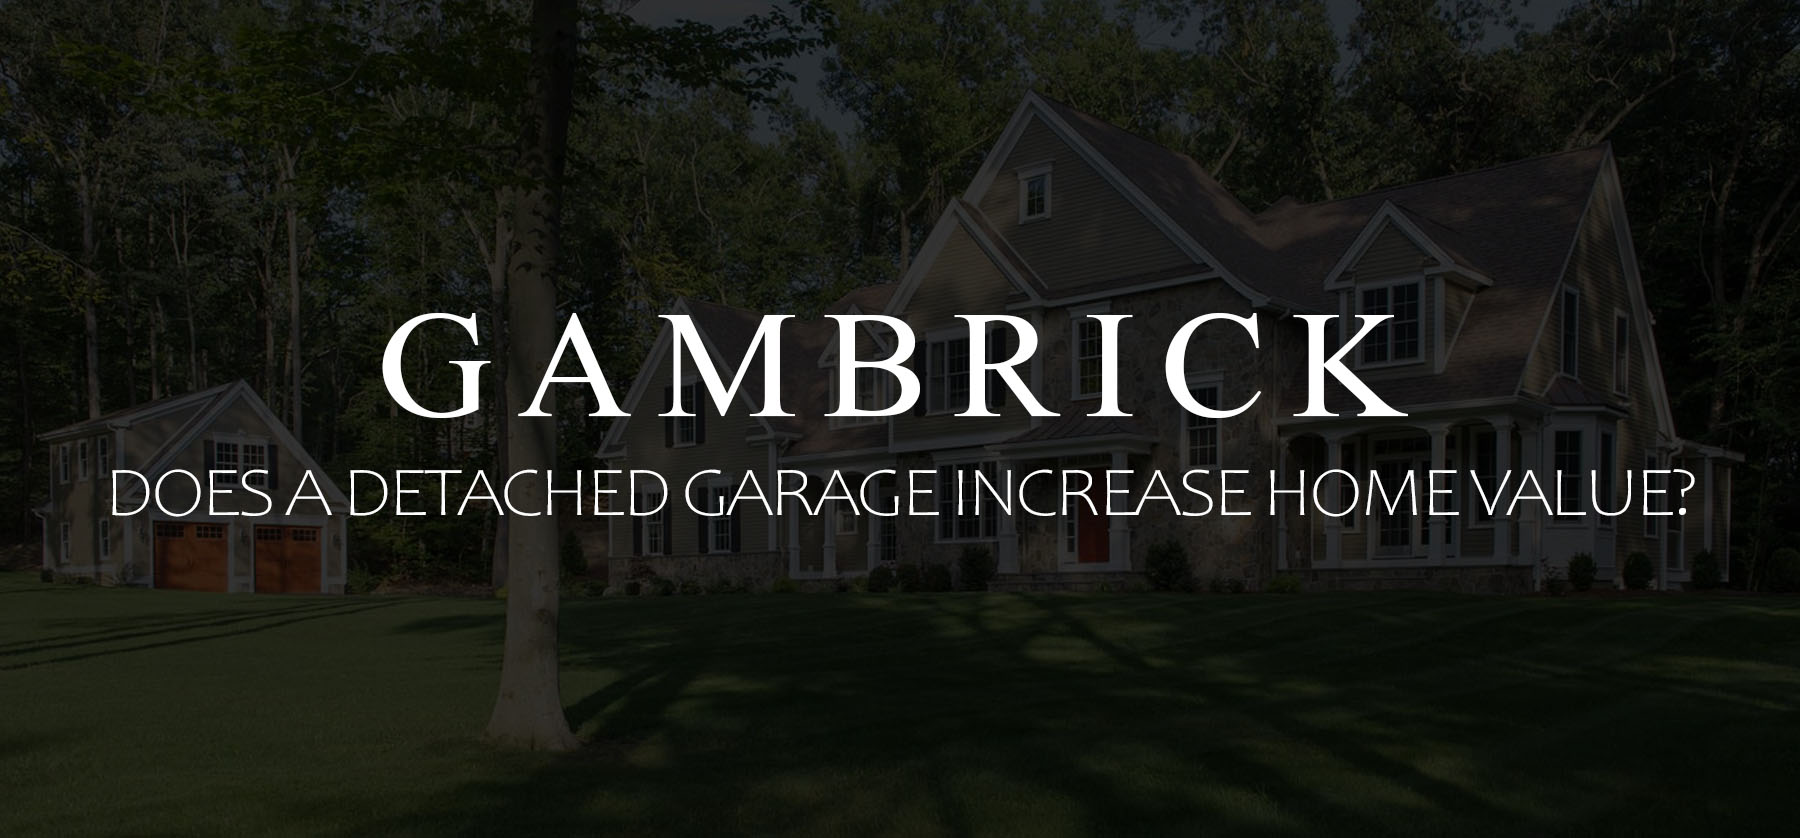 A Detached Garage Increase Home Value, Does Converting A Detached Garage Add Value